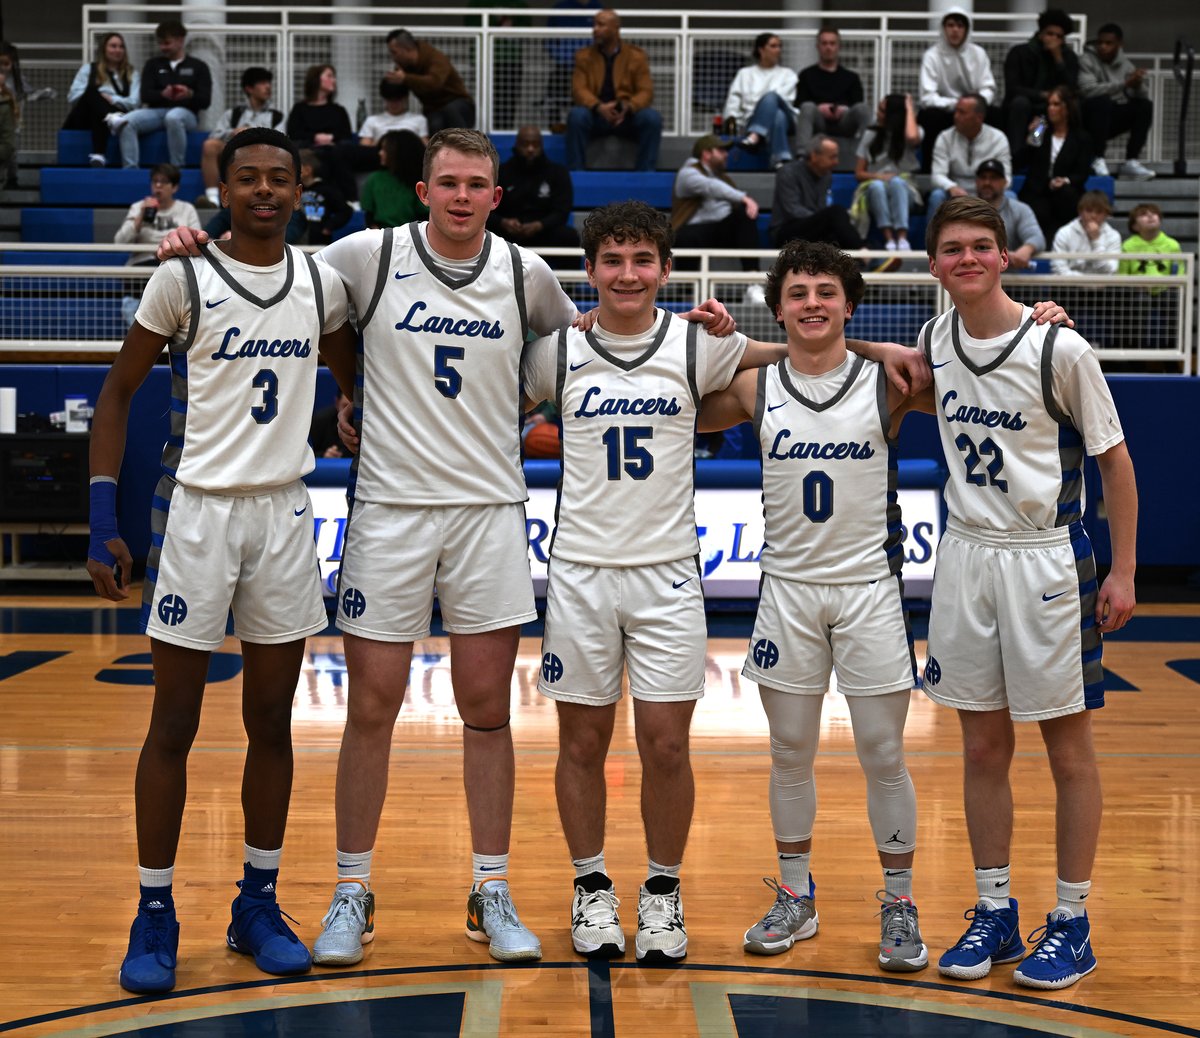 Last Friday marked the end to the 23-24 season. We cannot thank our 5 seniors enough for their contributions to #LancerBaskeball! Tim, Kevin, Nicky, Jimmy, & Trevor - THANK YOU for everything! All 5 are honor roll students with extremely bright futures. Lancers for Life!